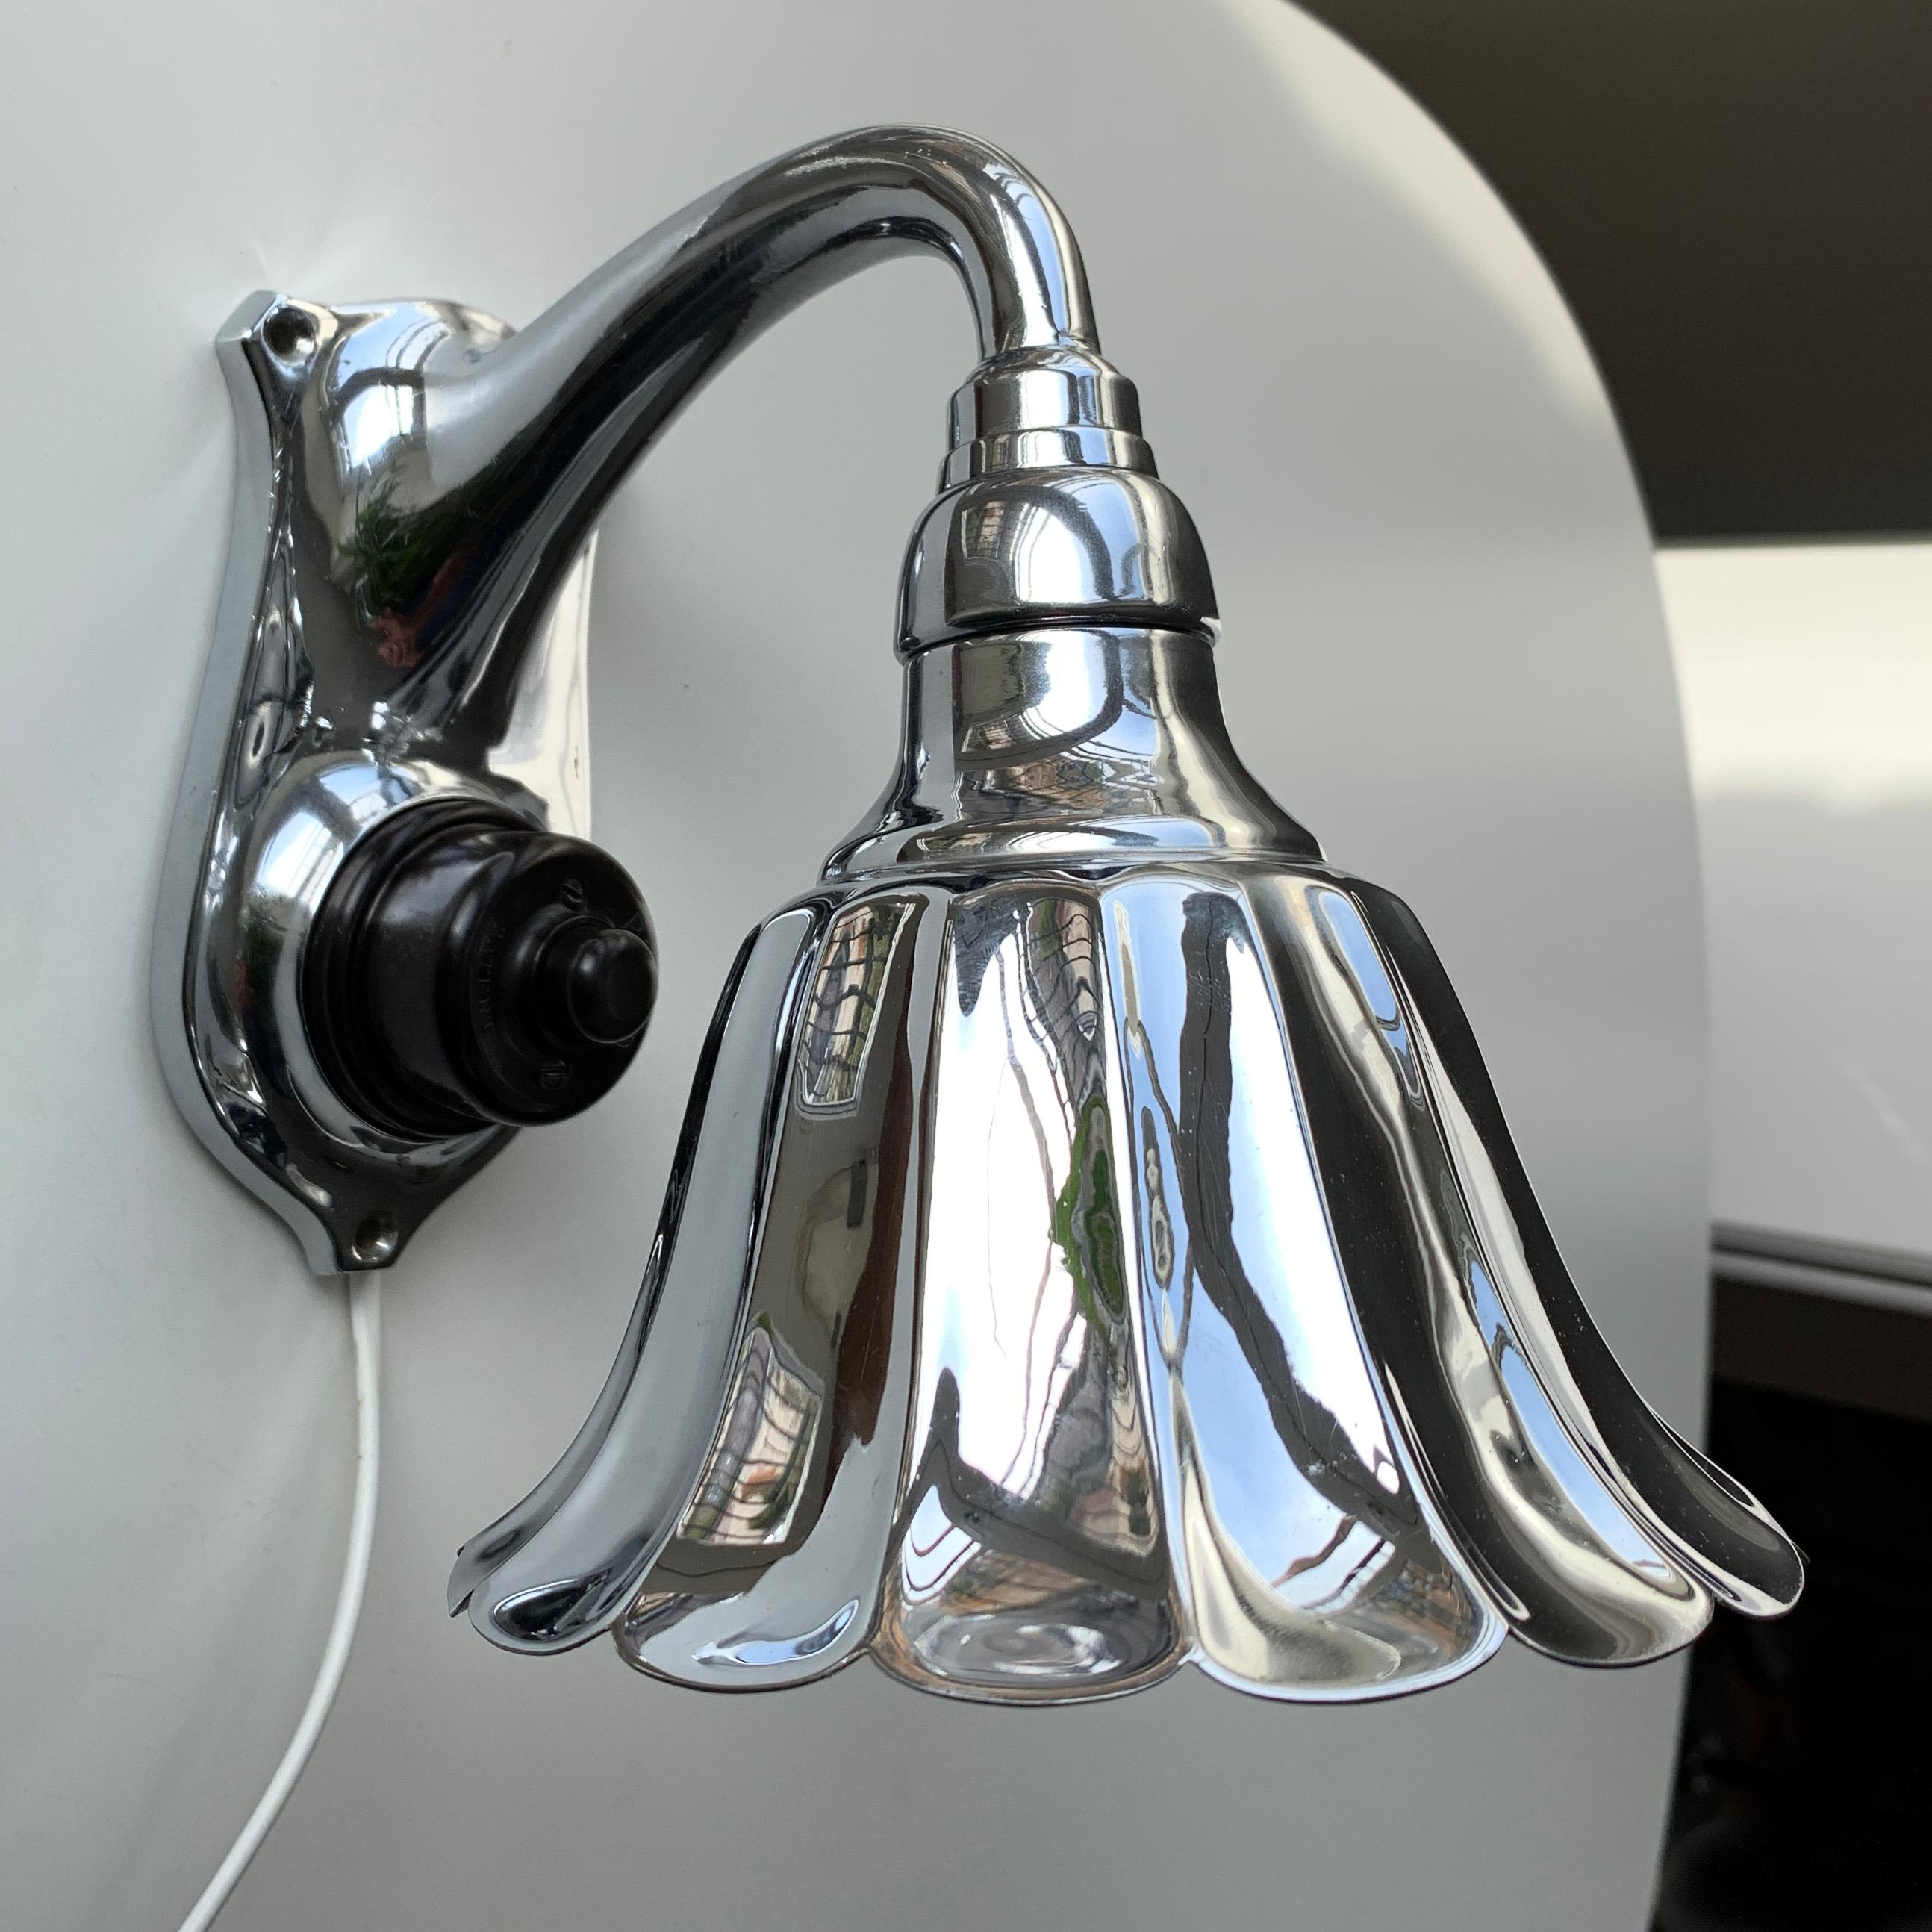 Art Deco chrome wall light with huge pello patented bakelite switch as part of the design. Chromed metal shade and base. The lamp is mounted with white cable for flexible connection. Can easily be mounted direct into wall outlet. E14 bakelite bulb